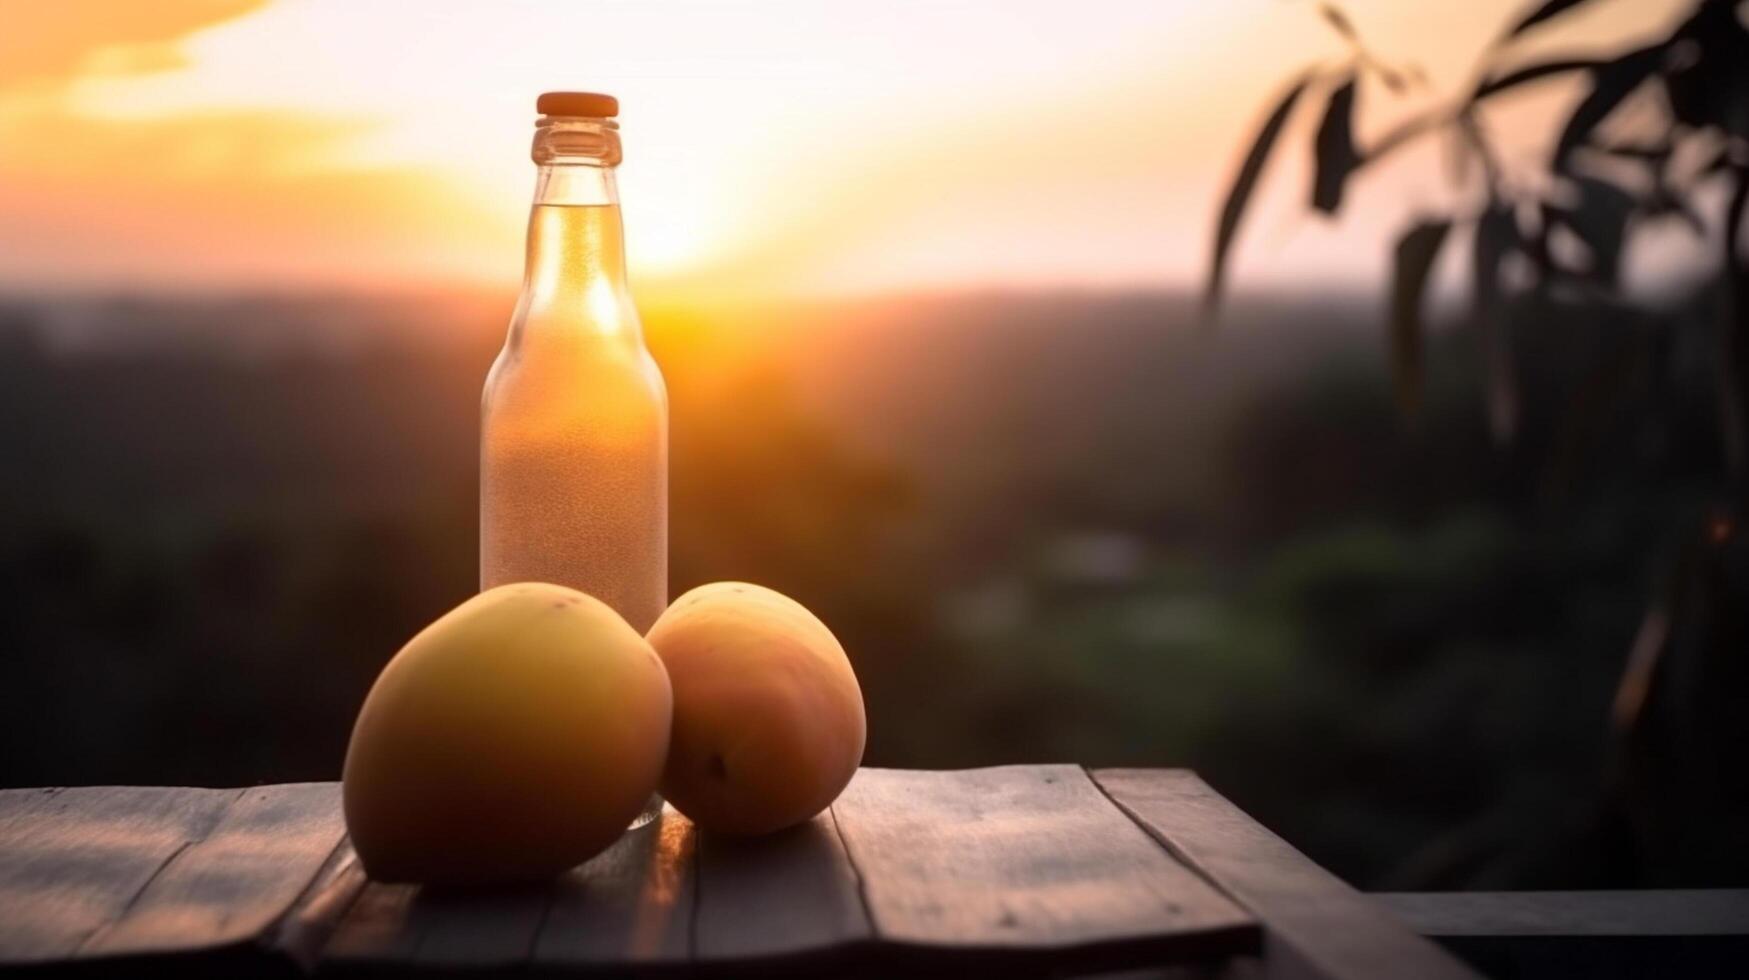 Apricot juice in a bottle on wooden table and sunset background, photo